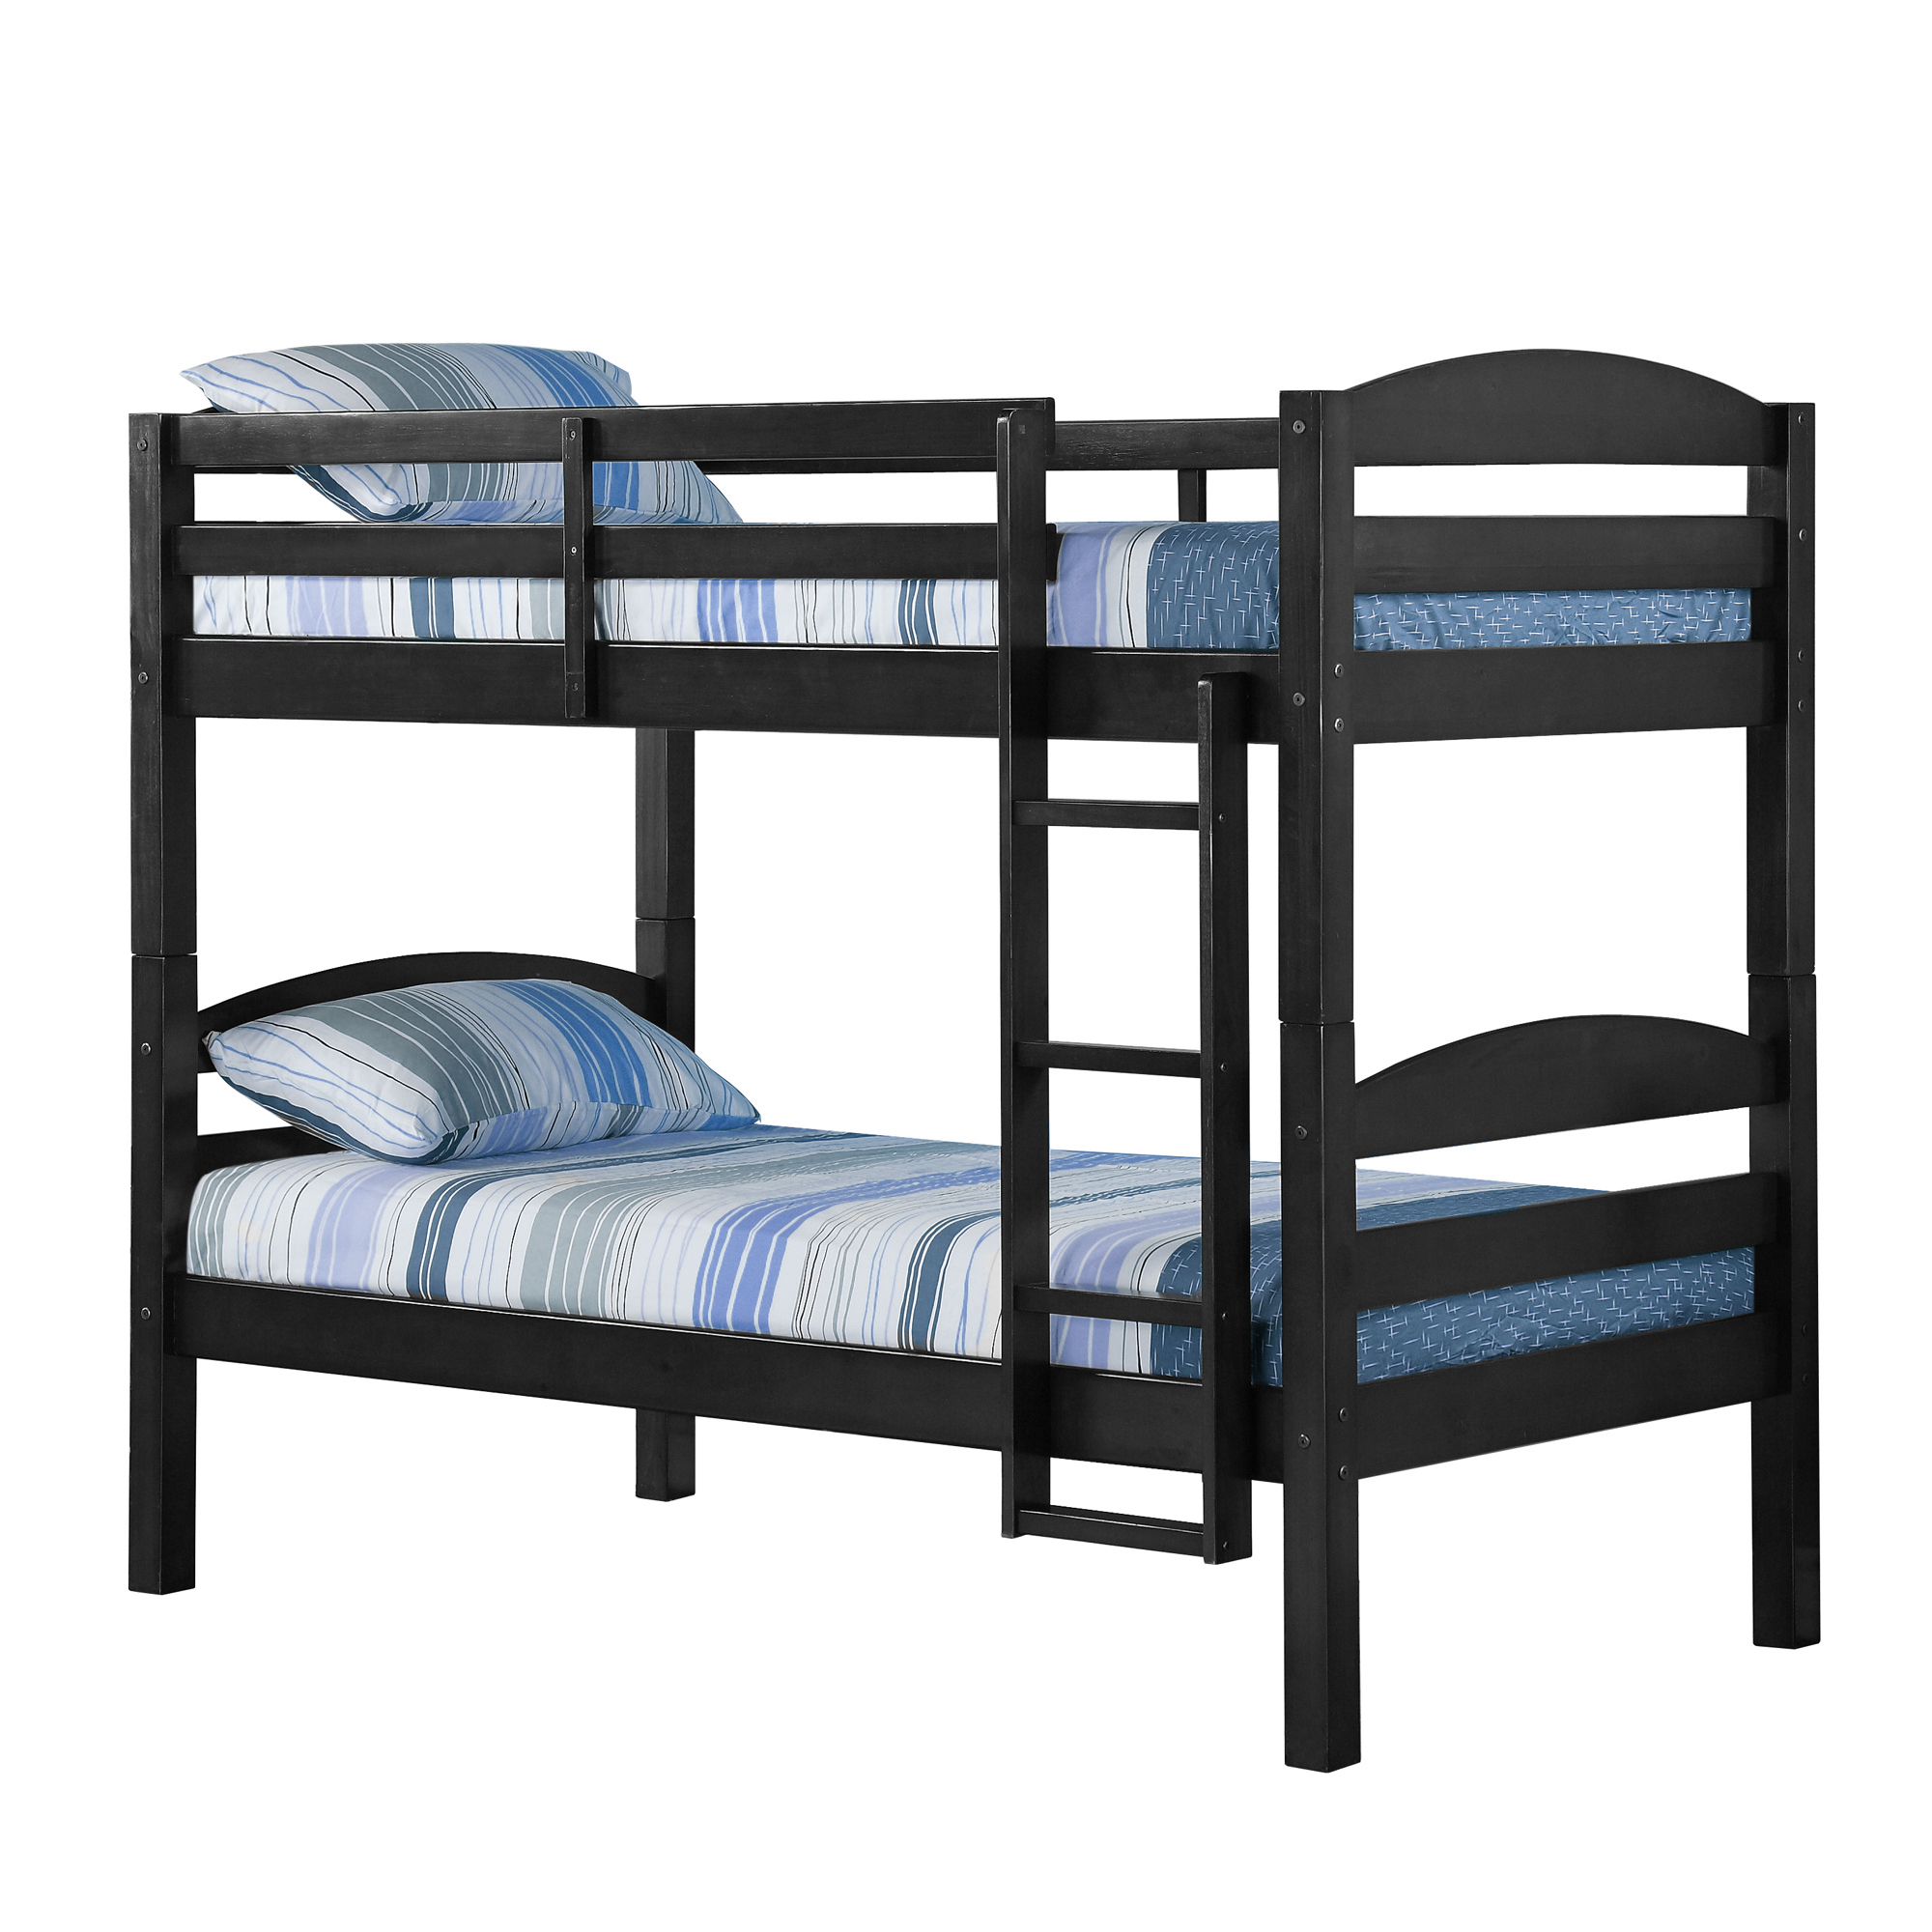 Solid Wood Bunk Beds For Kids, Sears Bunk Beds Twin Overhead